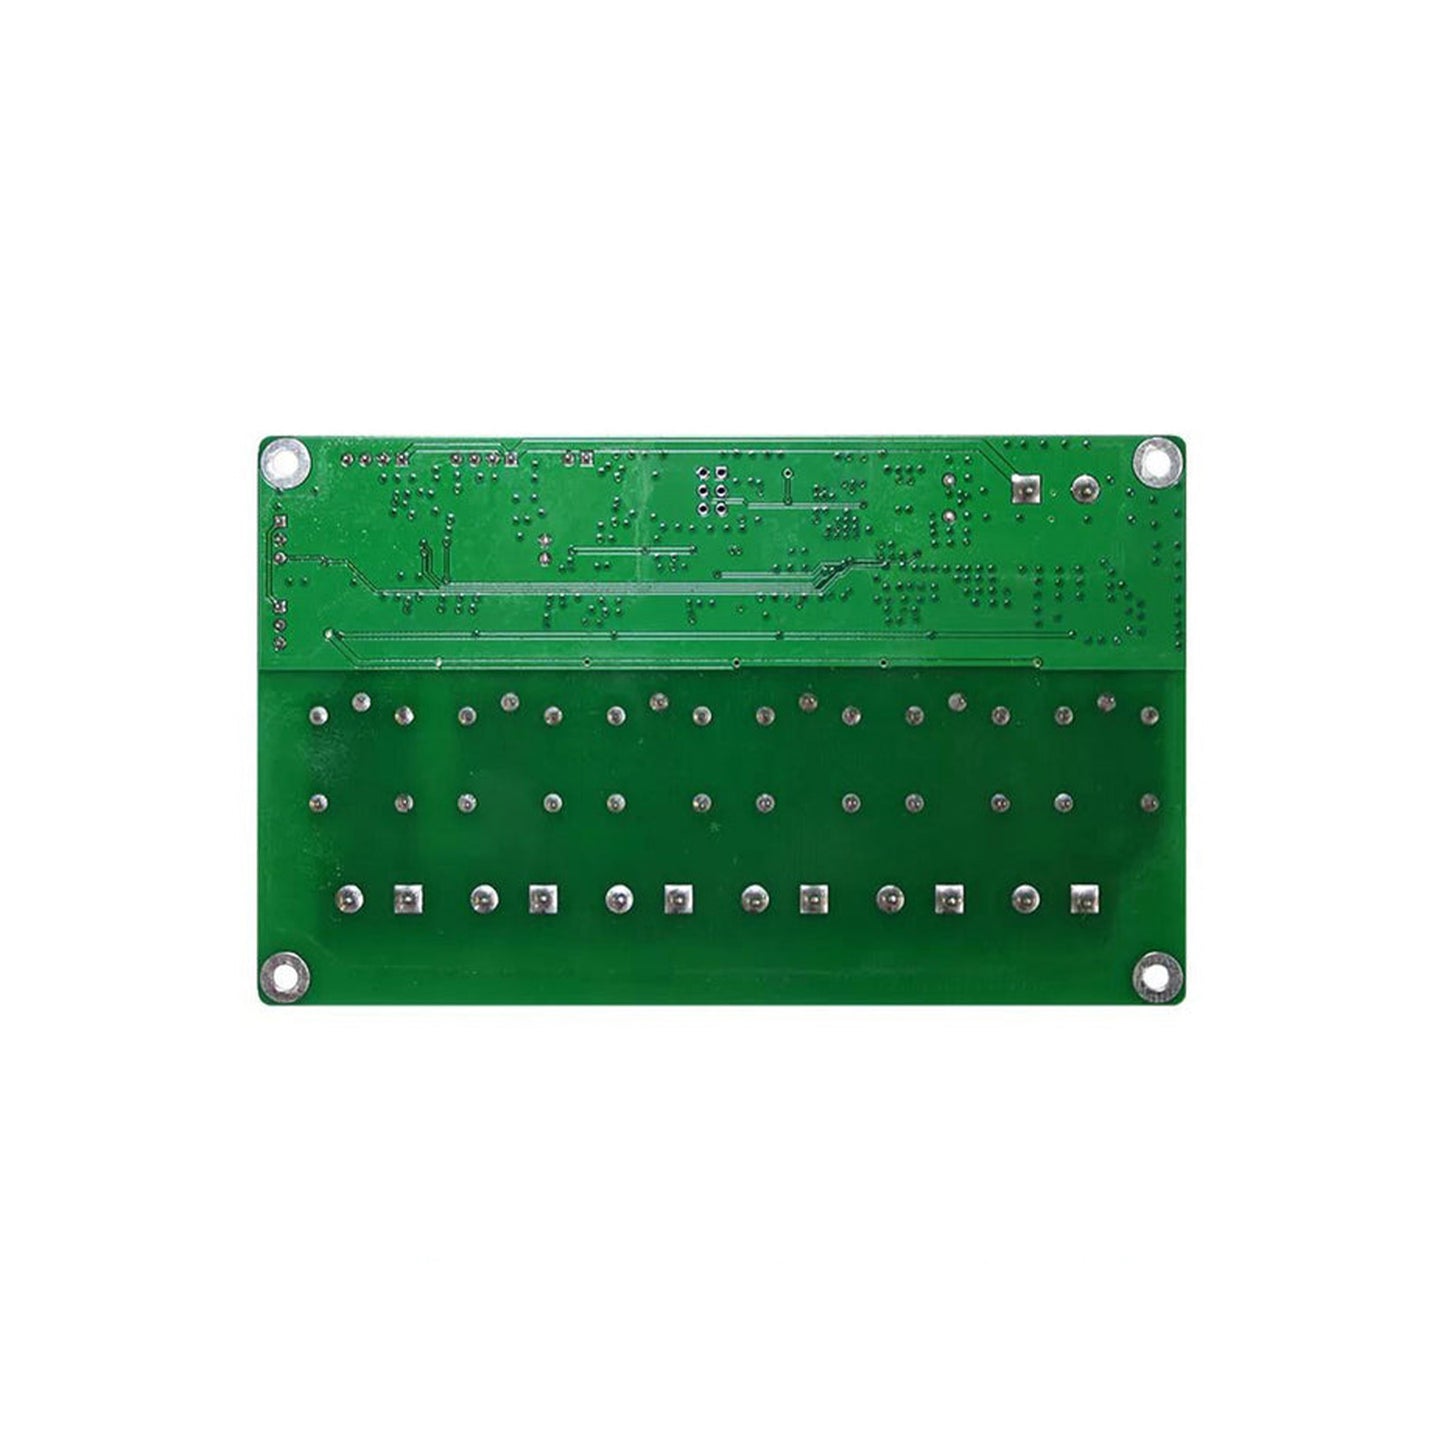 HD-K524 Full Color Relay Controller